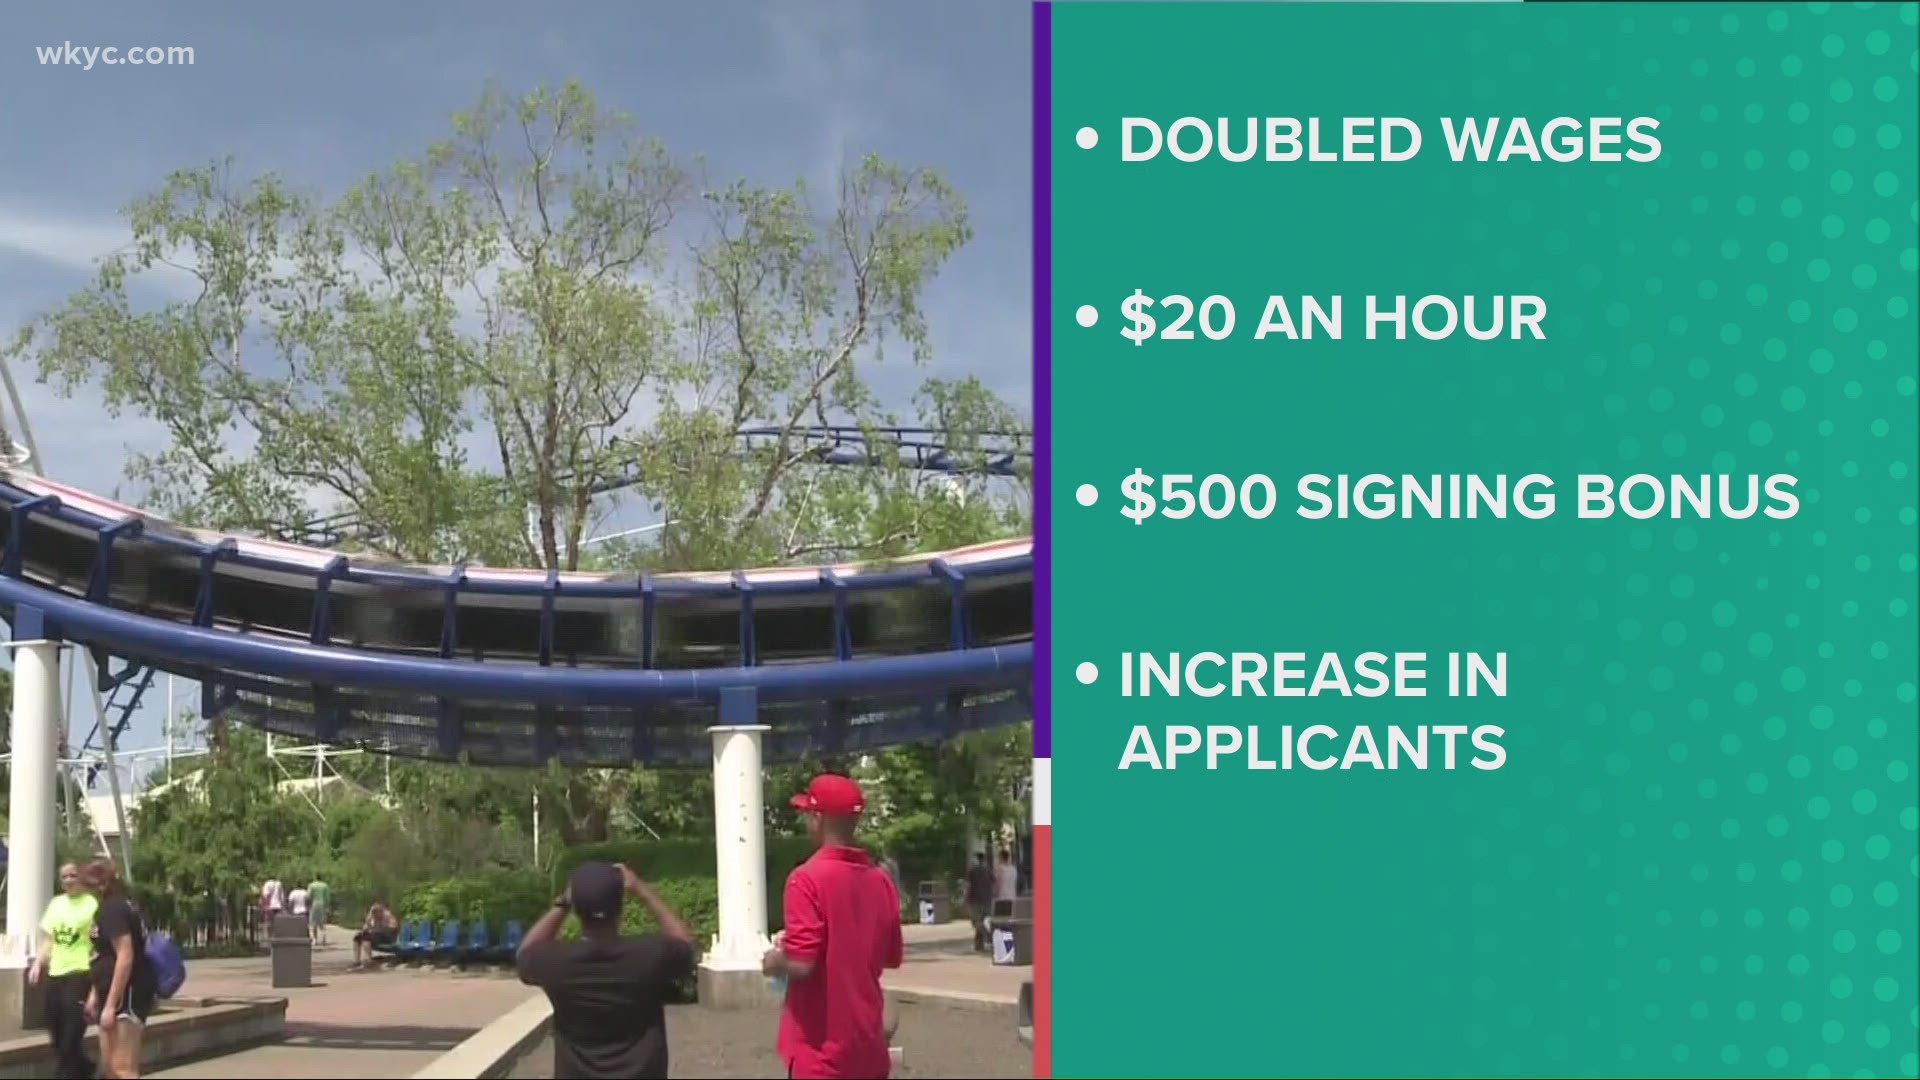 Cedar Point announced they were increasing seasonal and part-time pay for all positions to $20 an hour.  That is a 100% increase compared to 2020 wages.